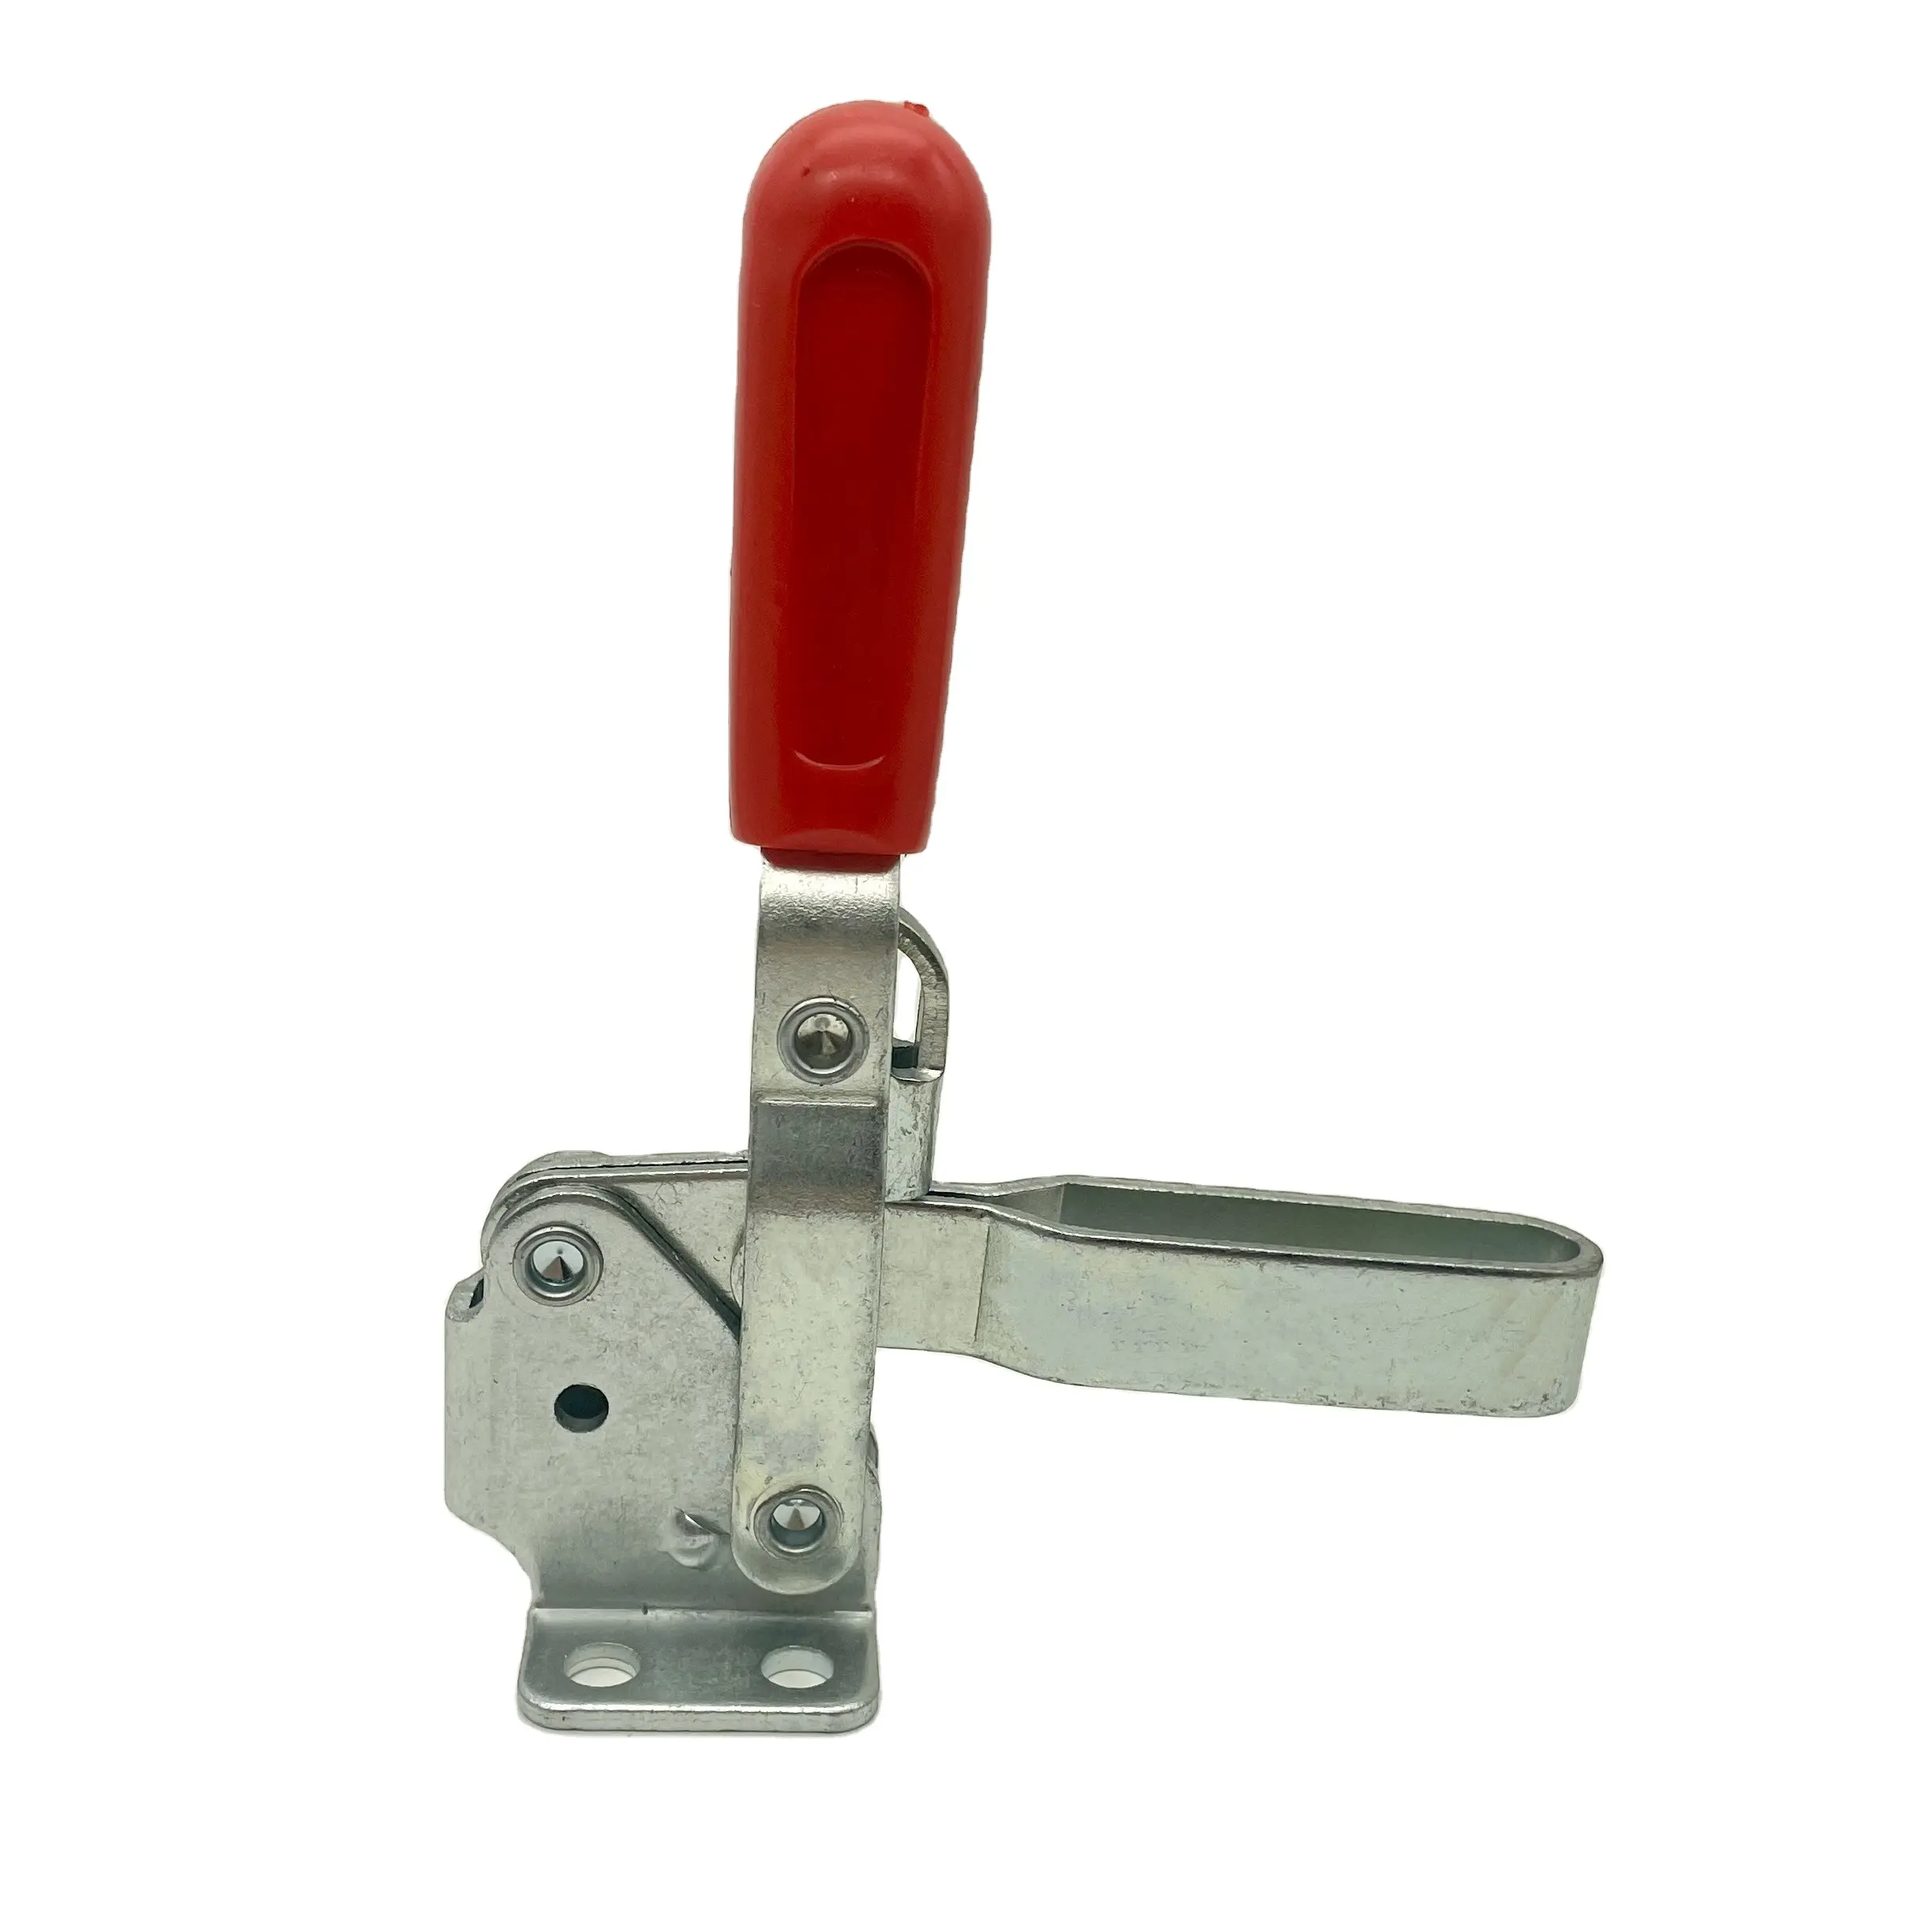 Vertical handle toggle clamp galvanized quick switch clamp woodworking fixing clamp with switch lock 227kg